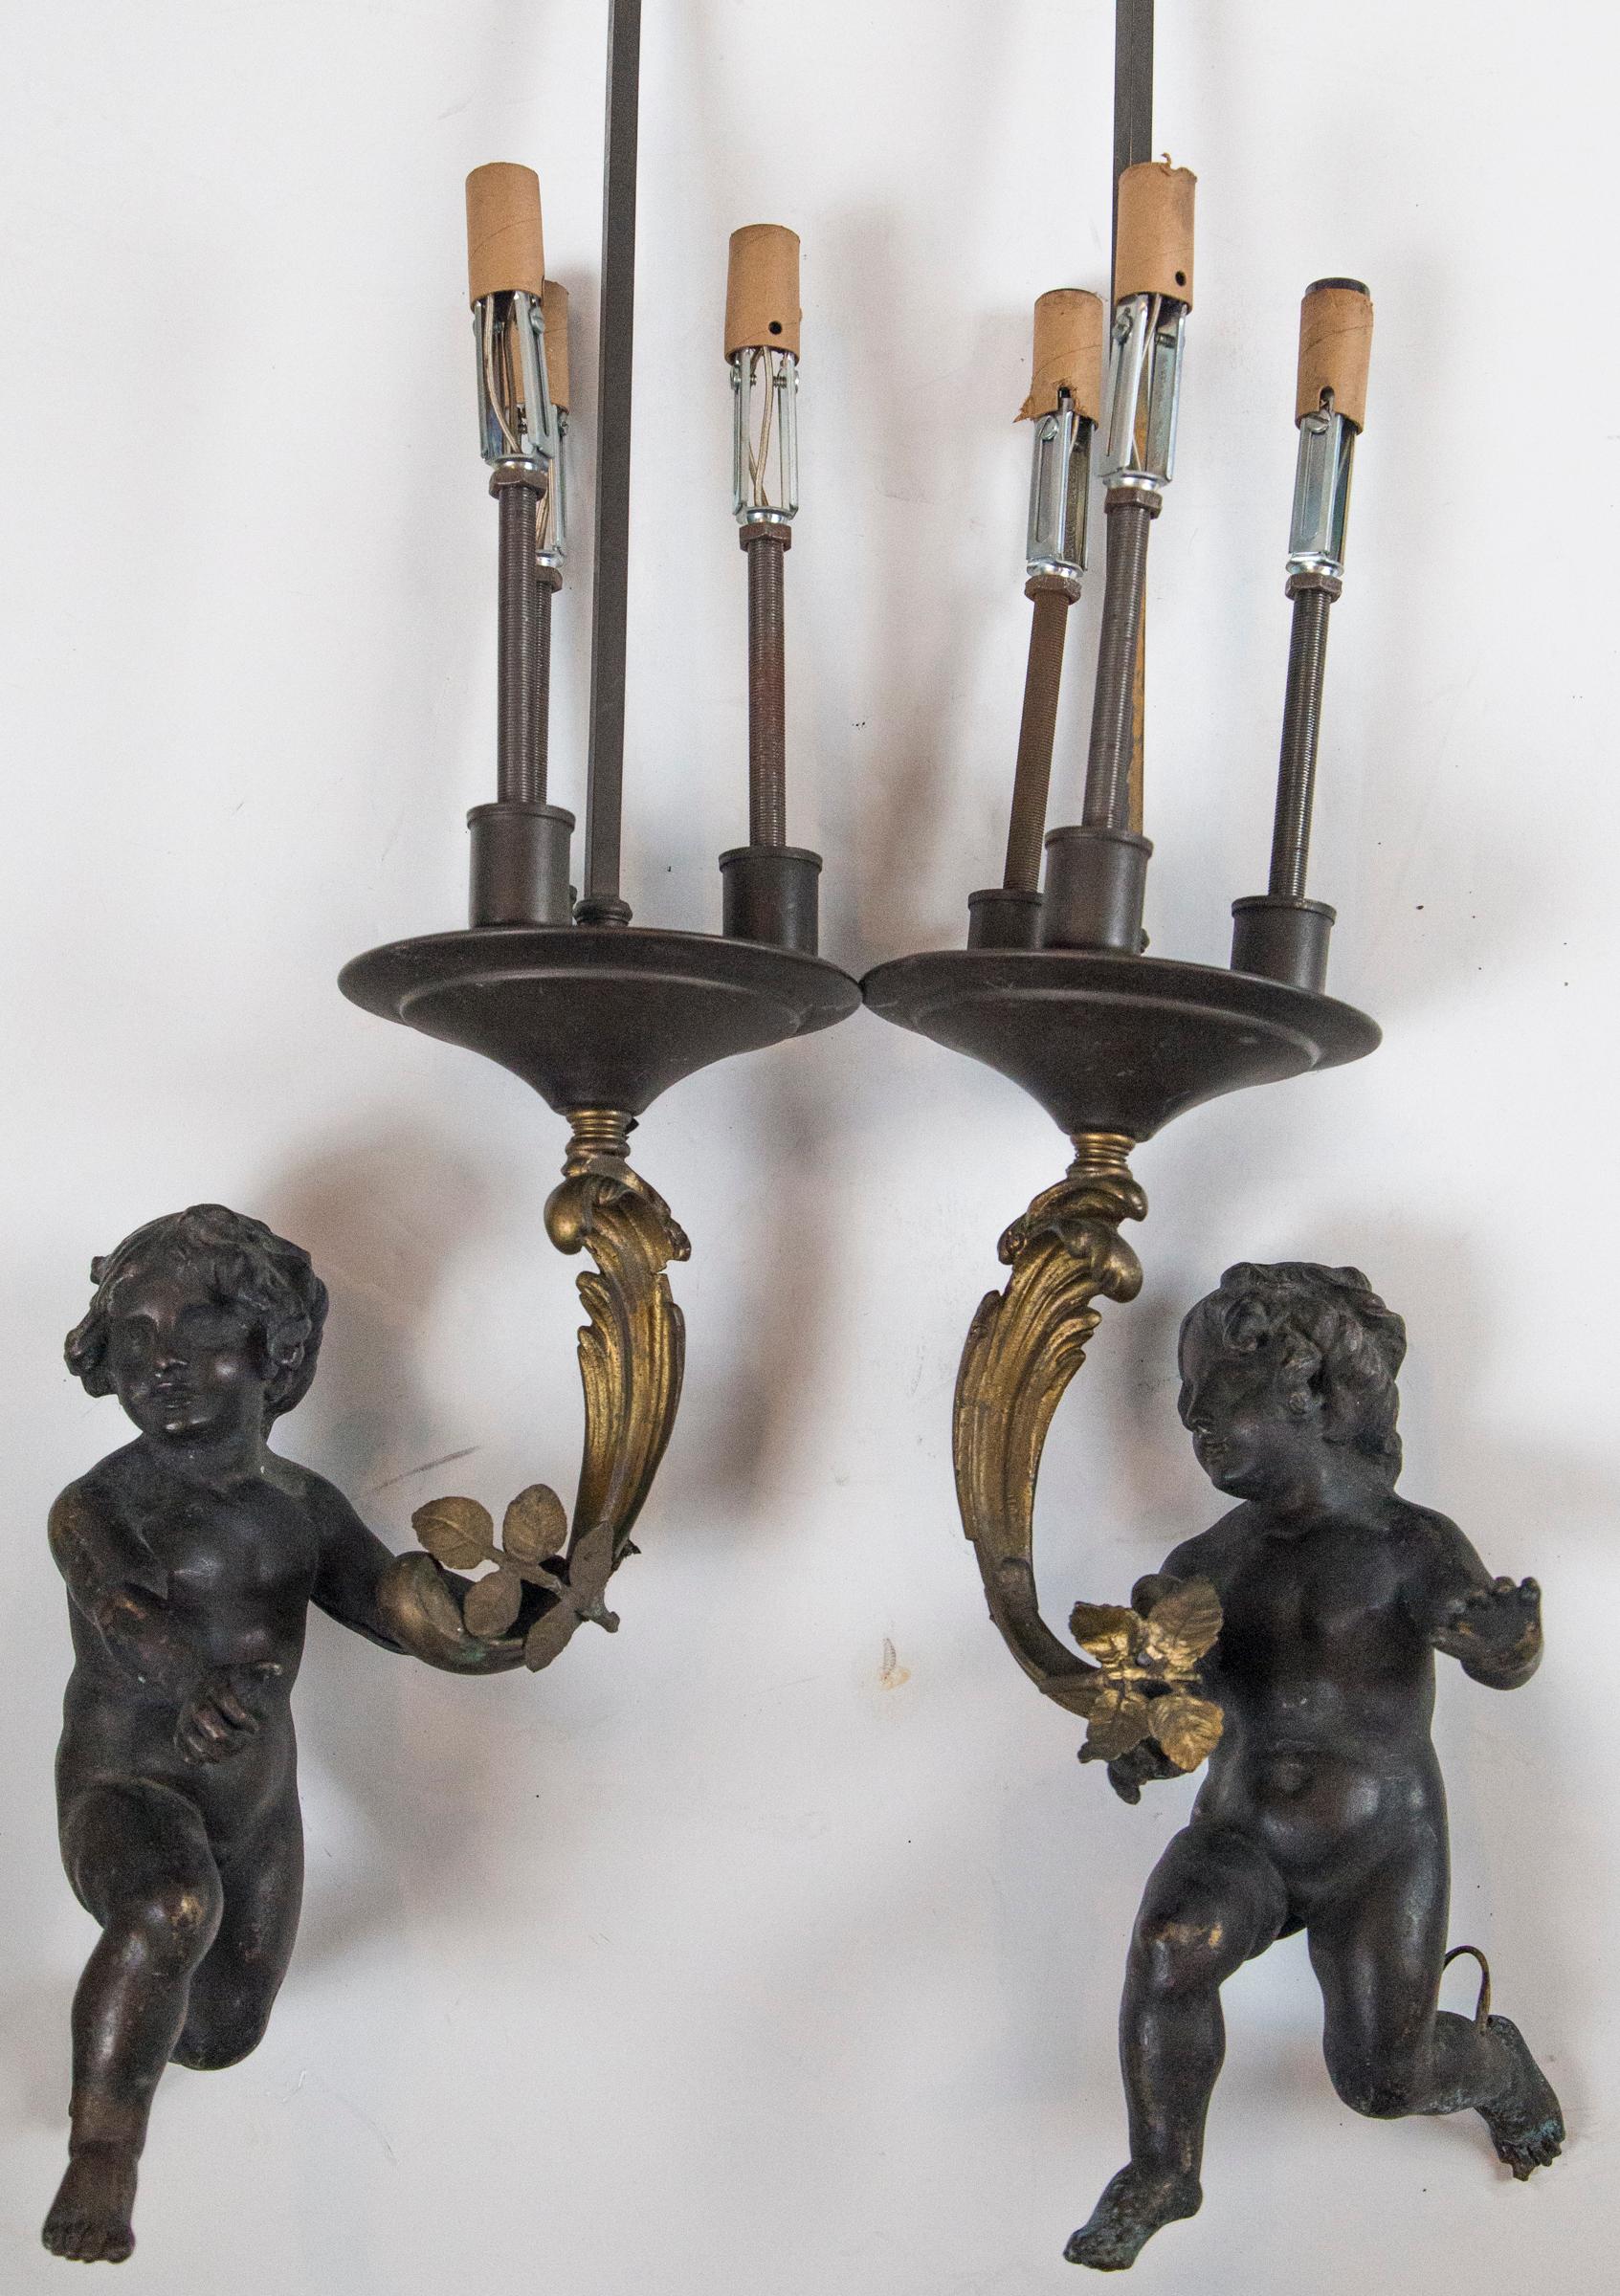 A pair of bronze putti hold a C-scroll of gilt bronze, below a pan disc measuring 6 inches in diameter. There are 3 lamping elements attached to the disc. A bronze rod with final rises above. Offered as is.